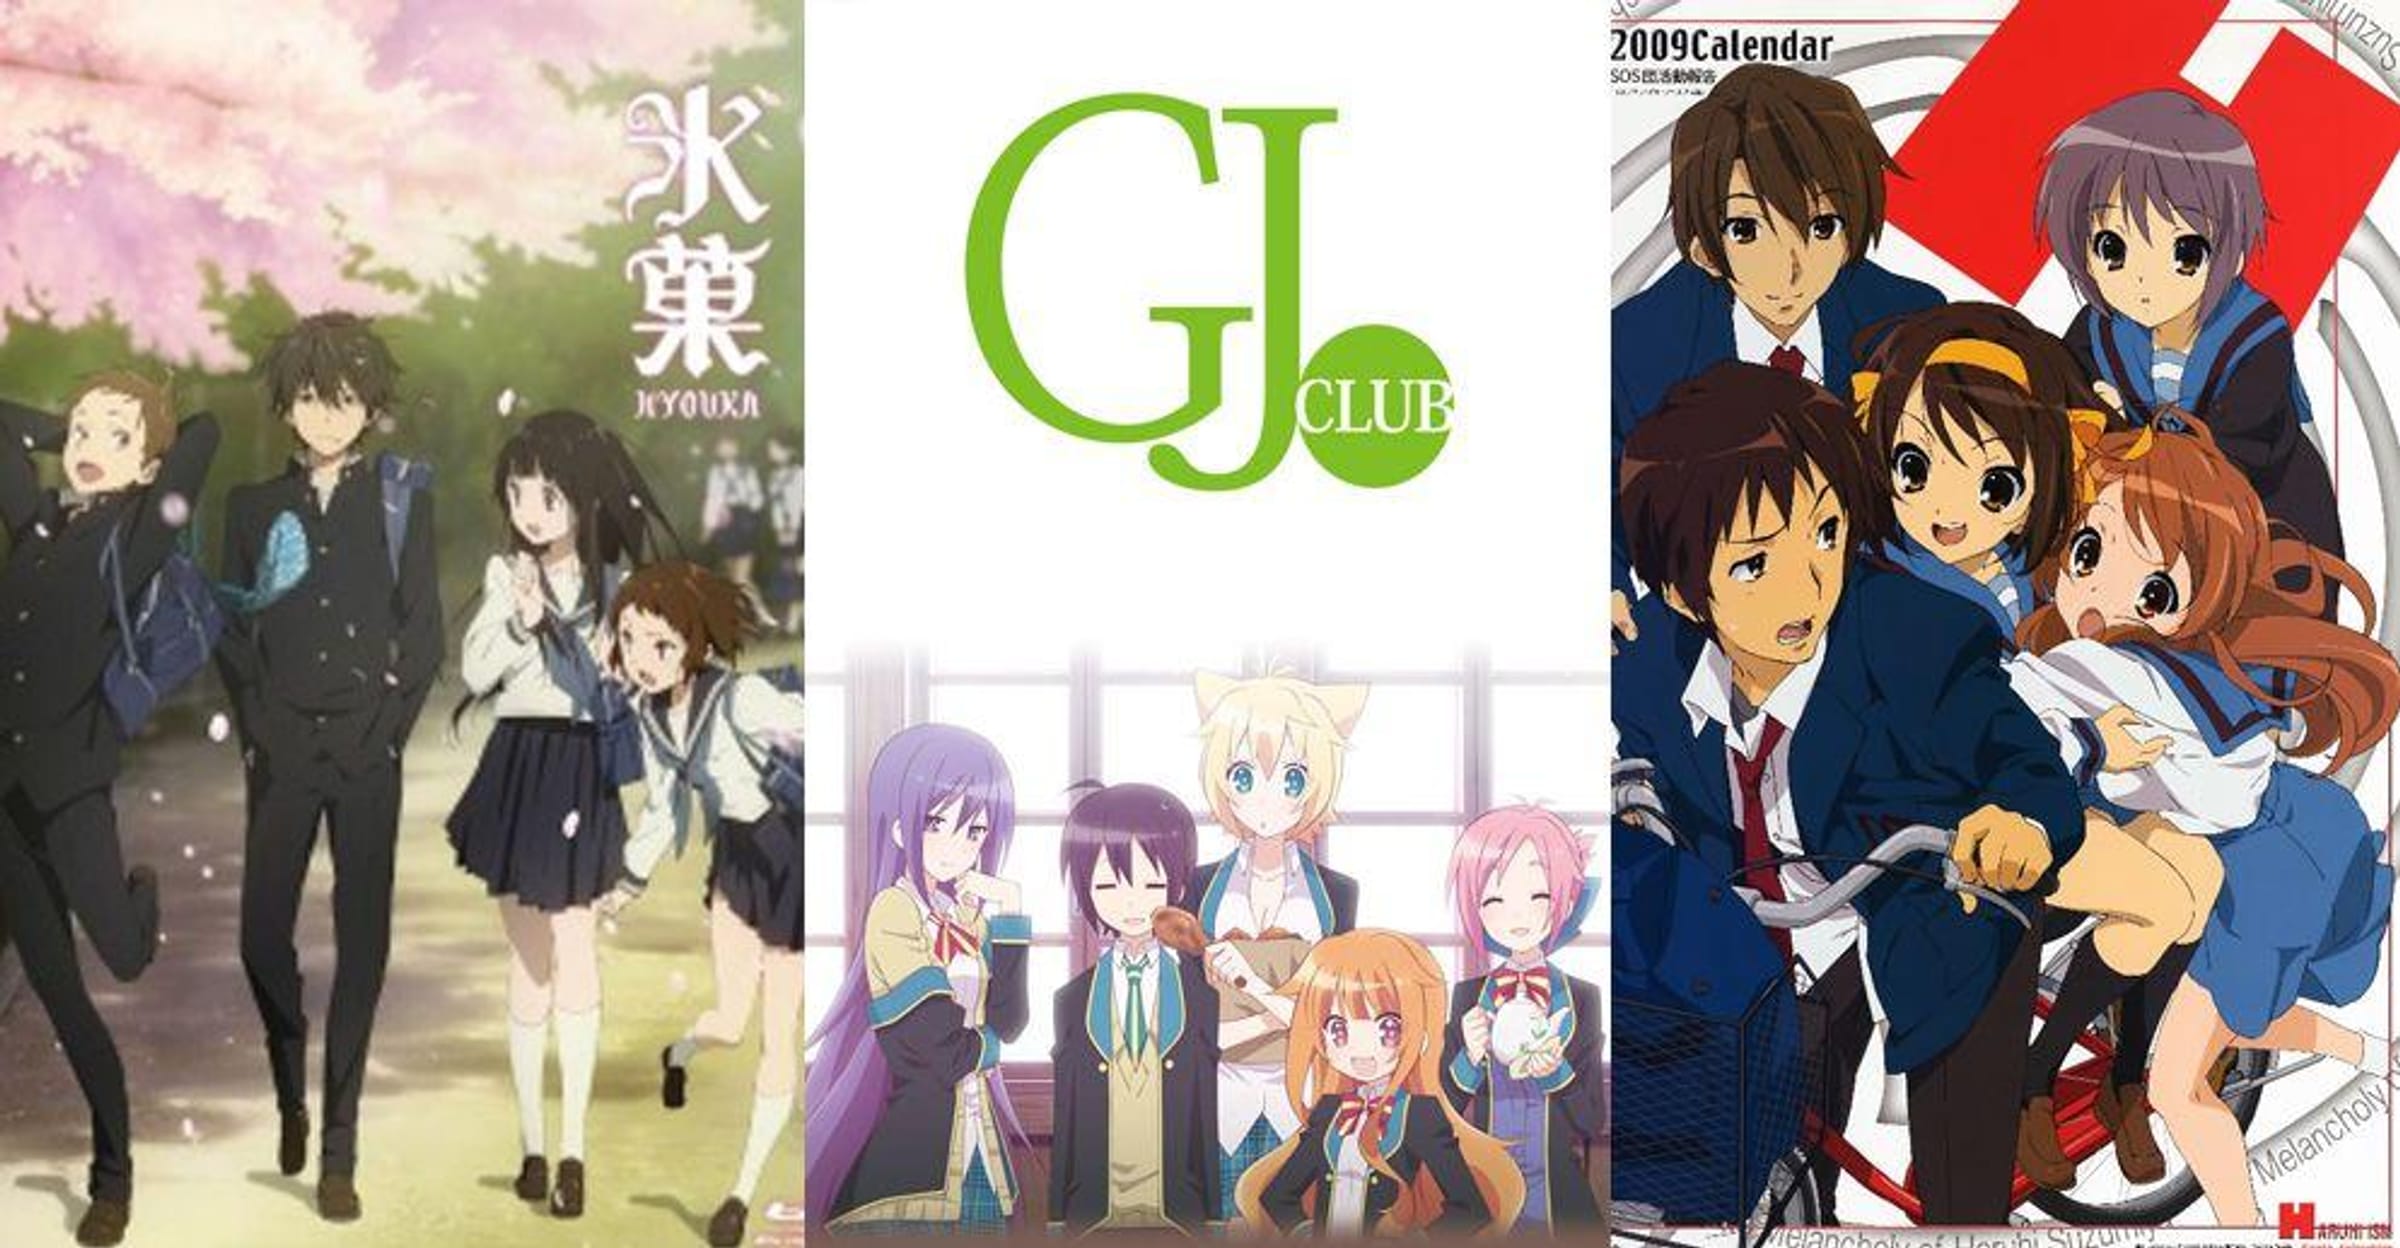 The 10 best anime shows based on school clubs